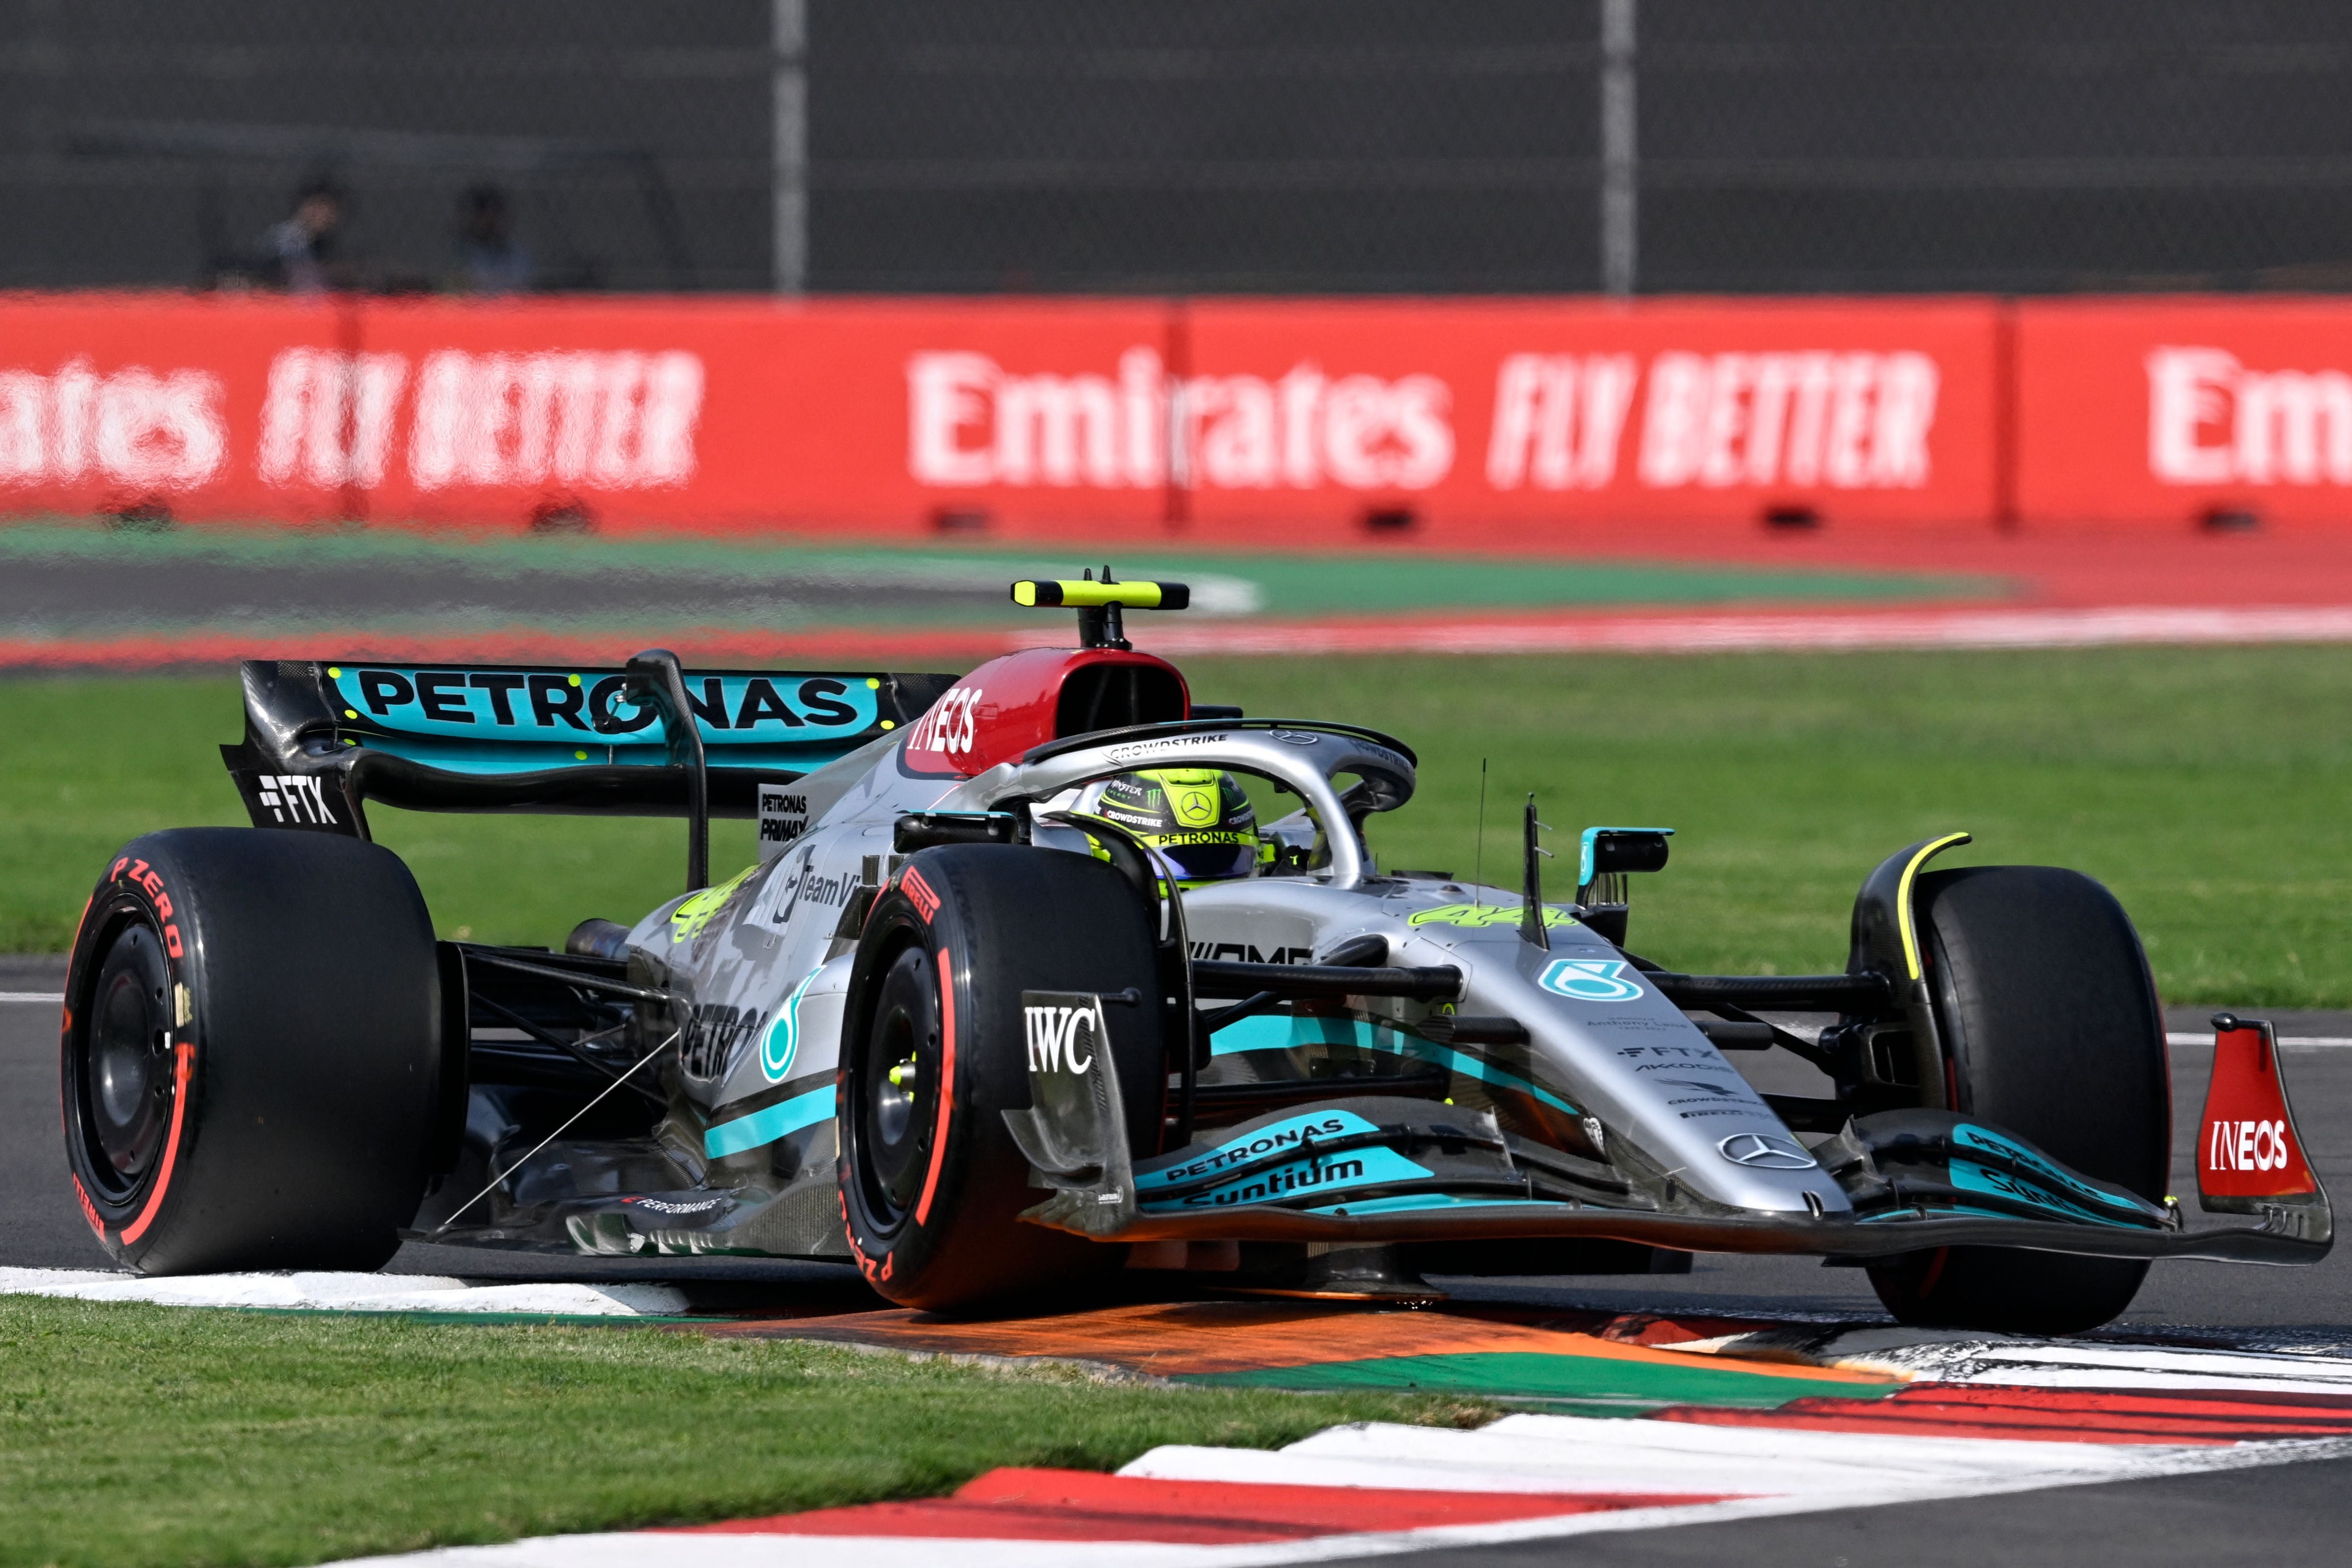 Hamilton was rapid in practice but could not put his Mercedes on pole